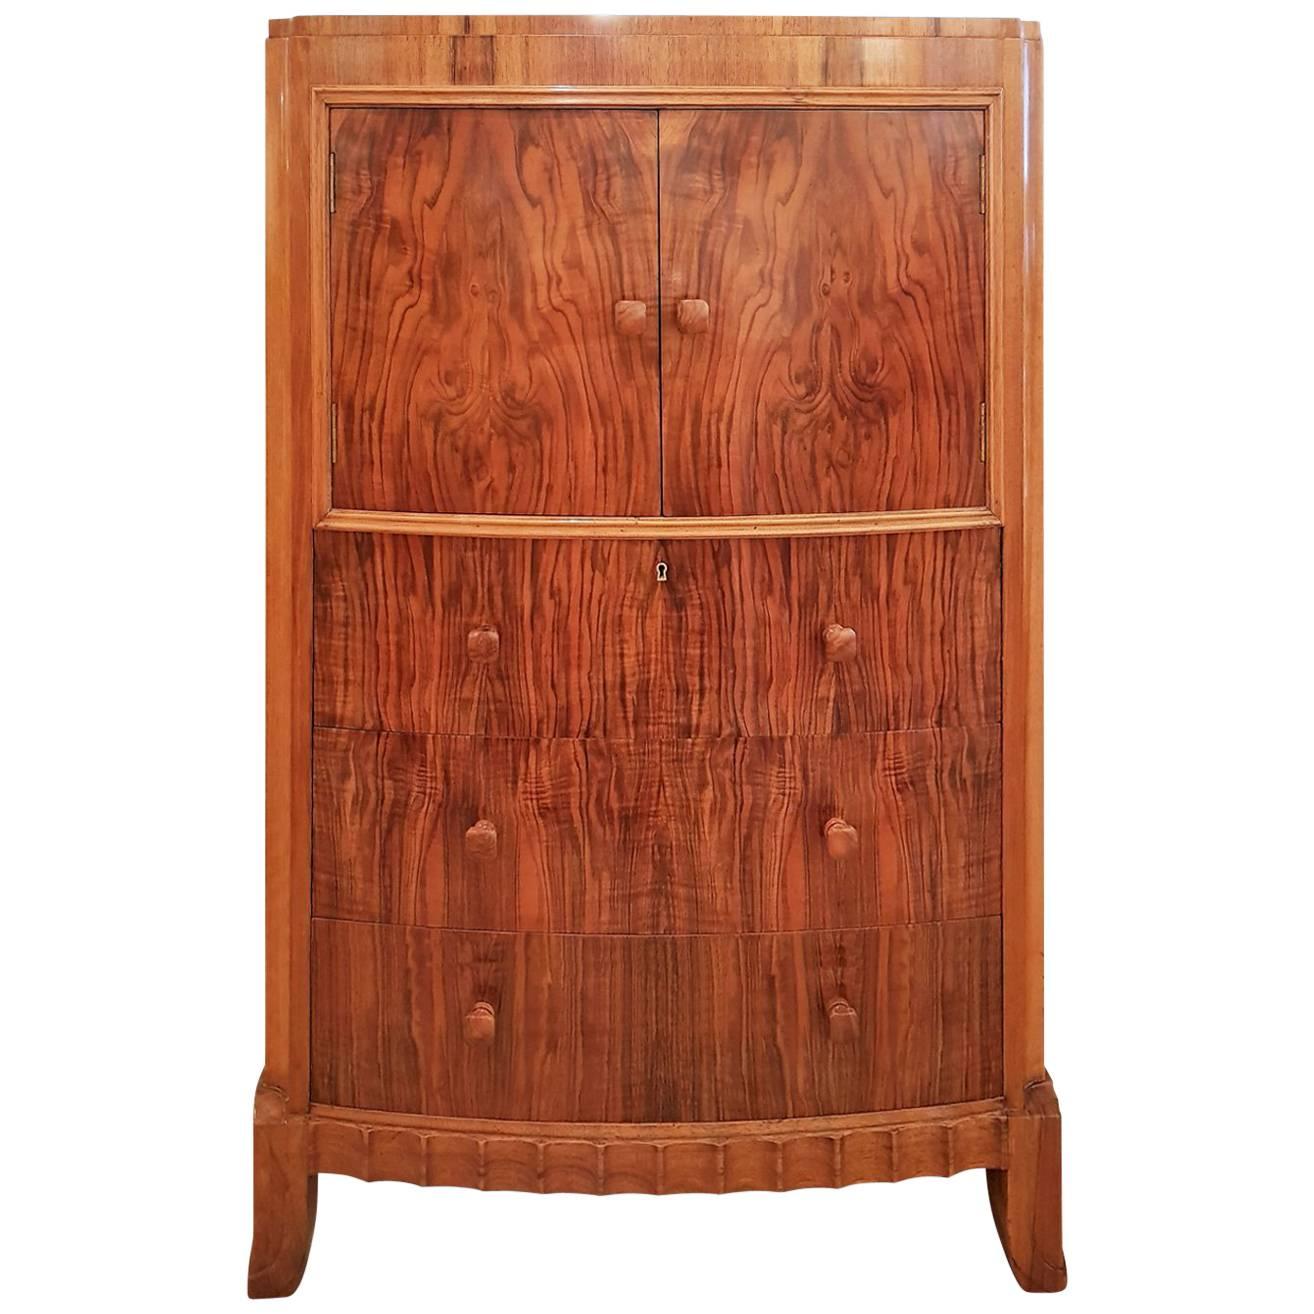 Art Deco Walnut Tallboy Chest with Cupboard over Attributed to Serge Chermayeff